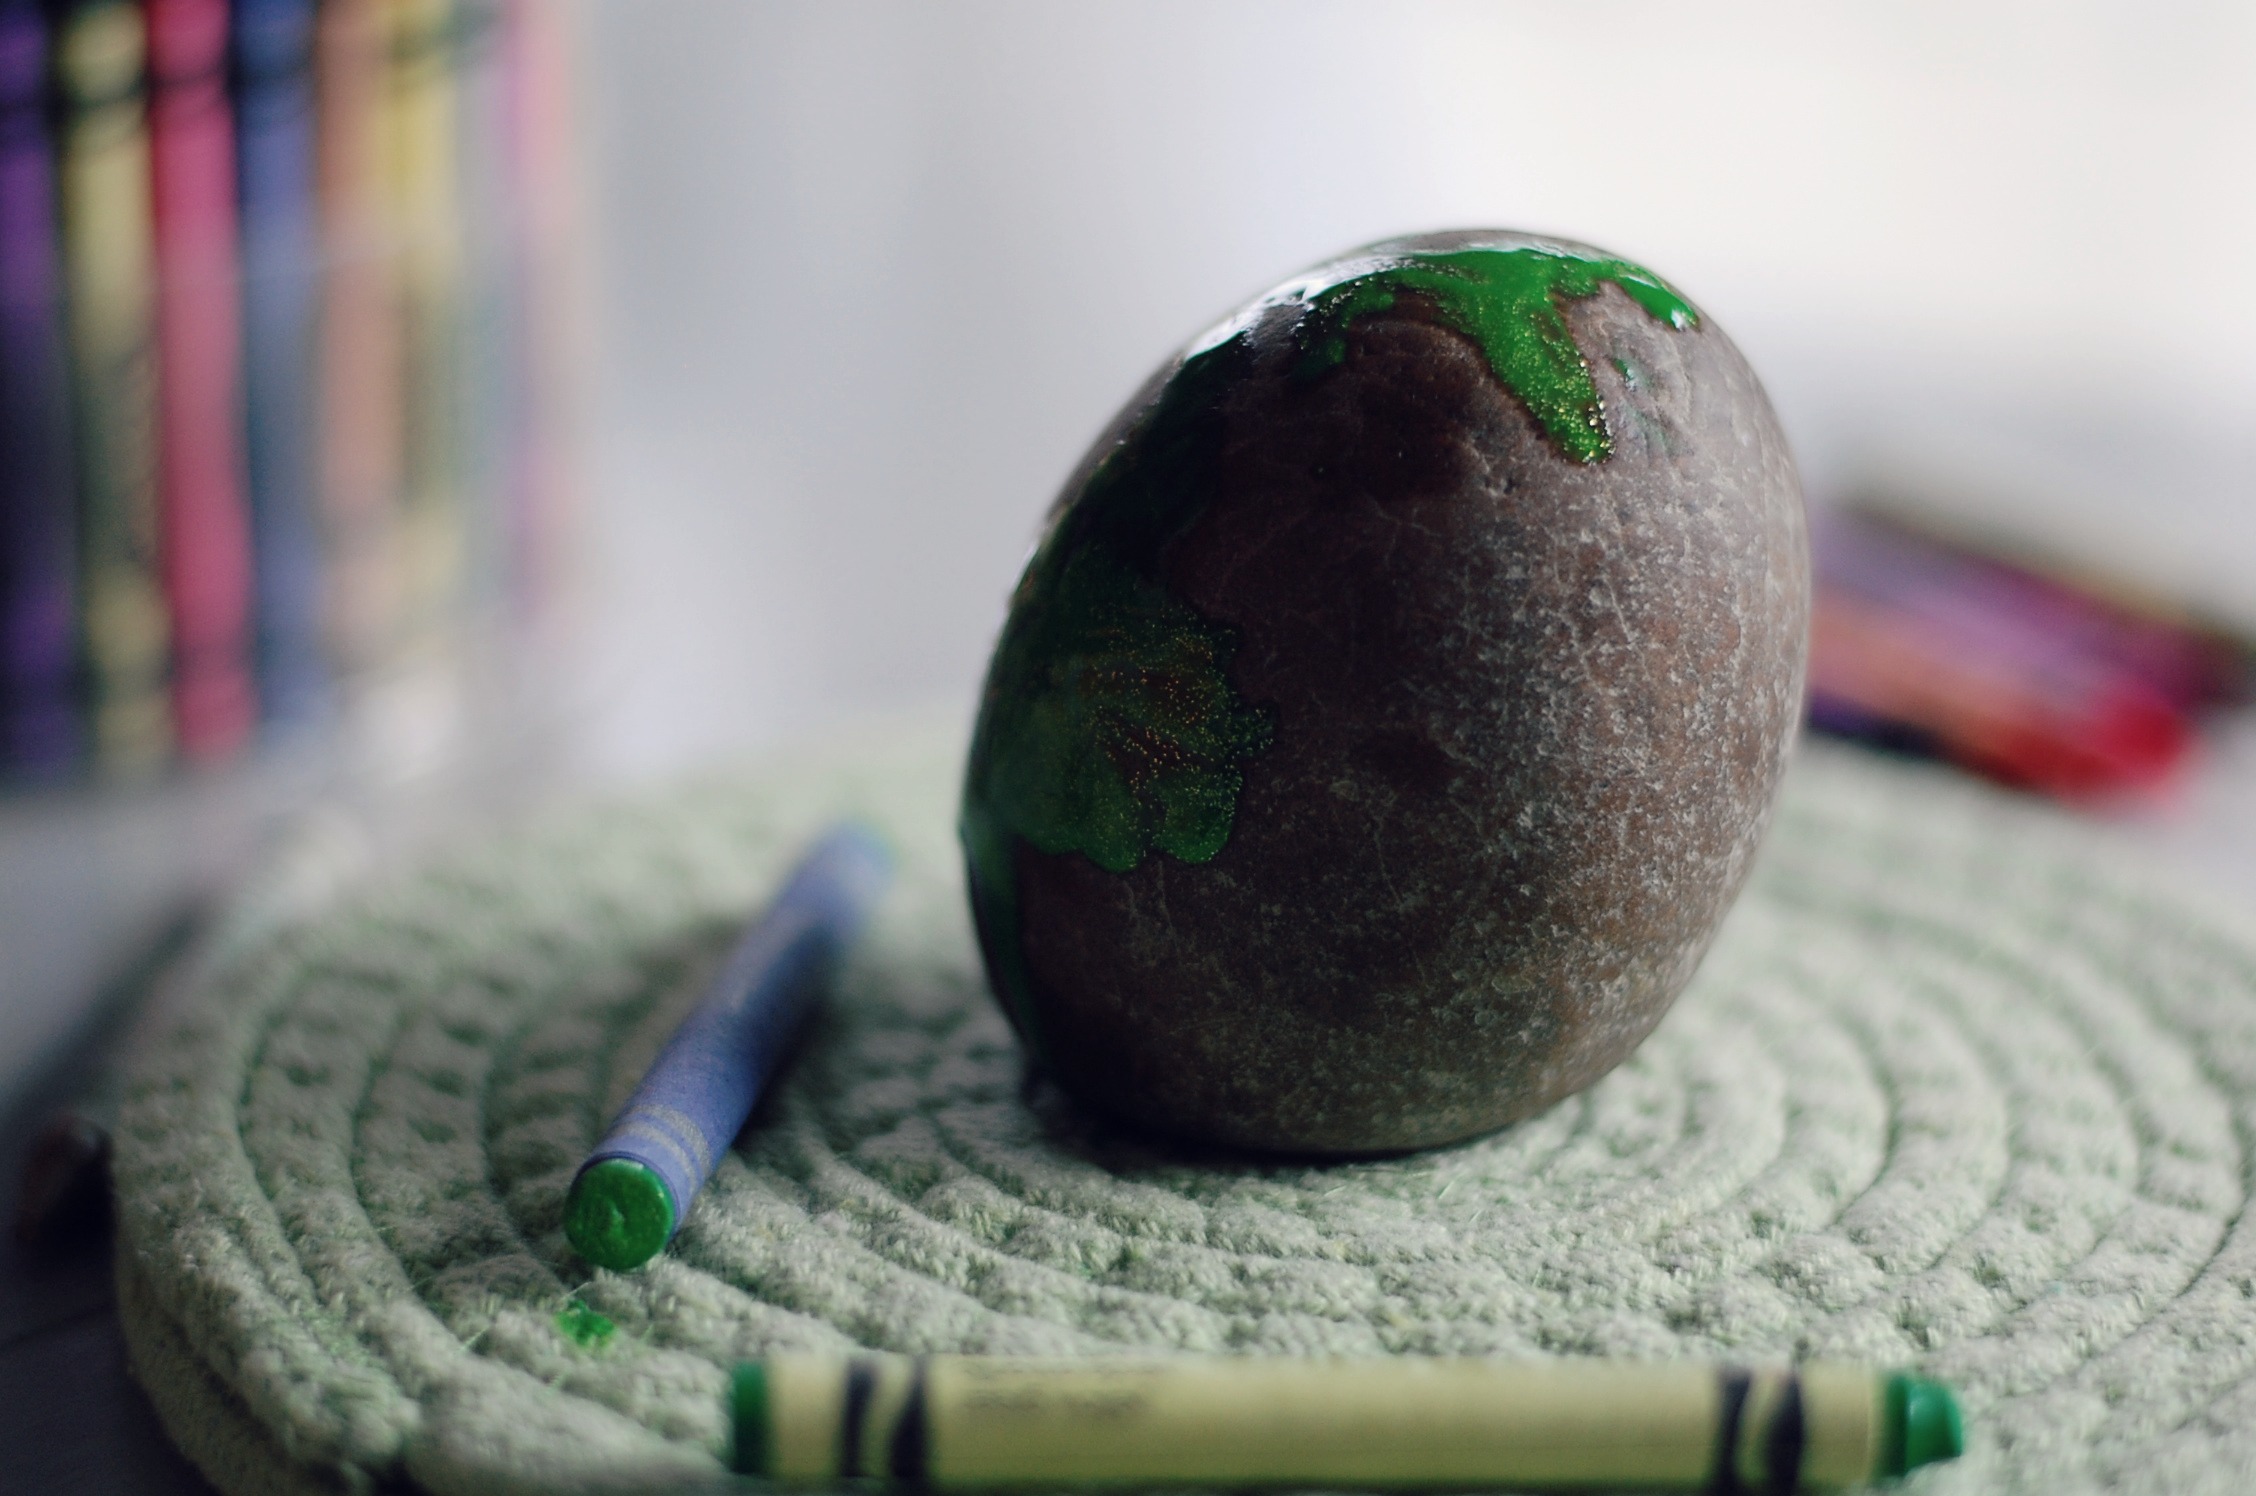 how to: paint rocks with crayons